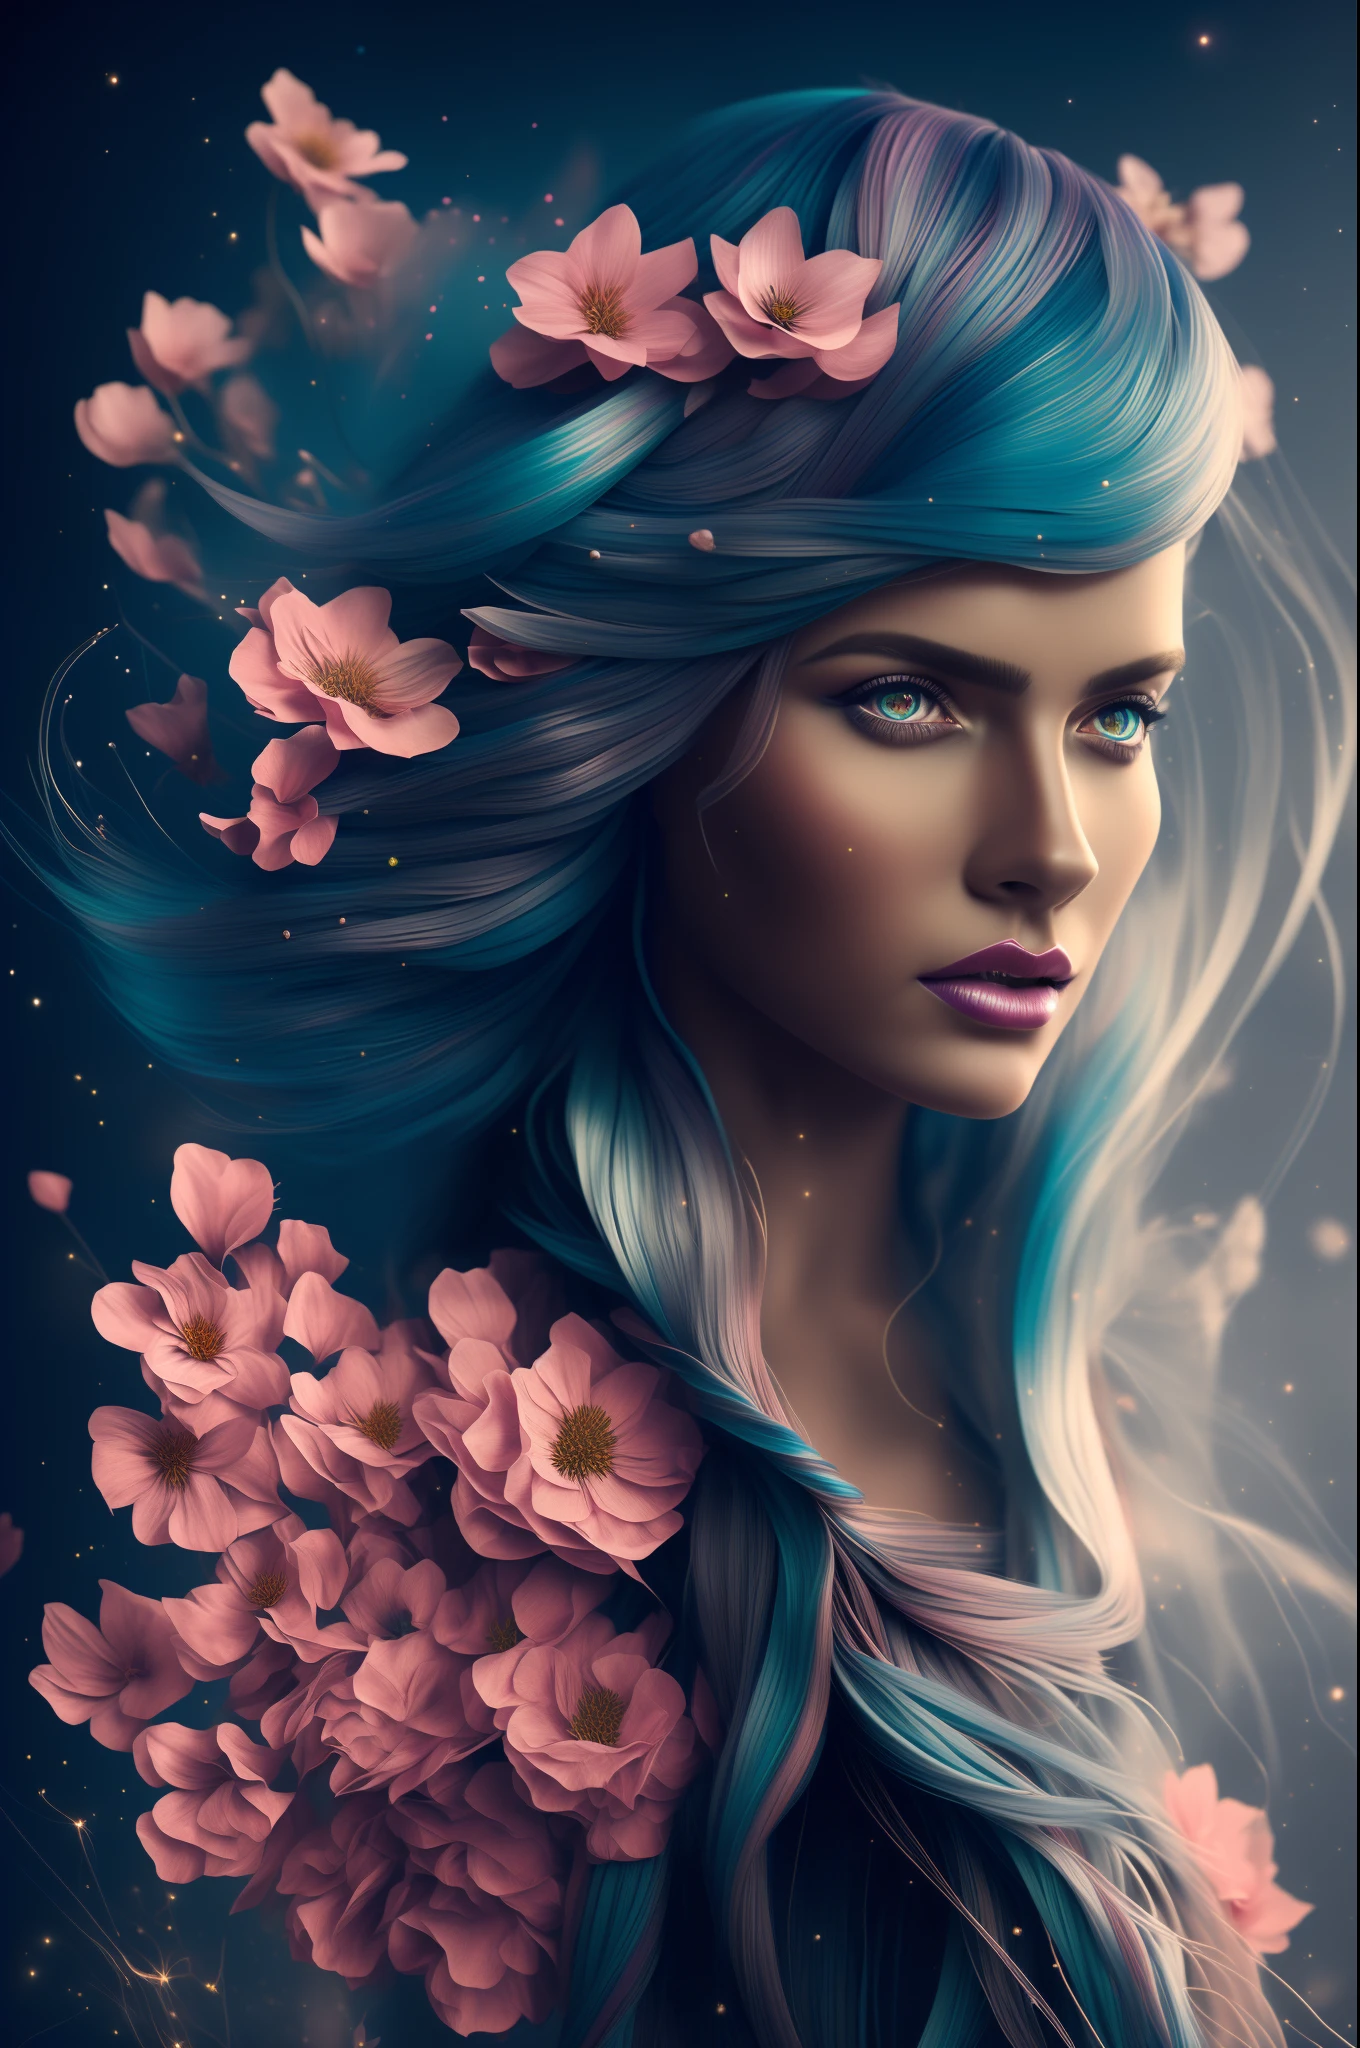 (Masterpiece), (Best Quality), (photorealistic), ((A woman with intricately colored hair made up of flowers)), (Long hair), (magic environment with sparkles), Cinematic lighting, (High Contrast), (Ultra Detailed), Beautiful flowers, A realistic sculpture of wires by Alberto Seveso, (fantasy art style), behance hd, 32k, ultra sharp, ((shiny ultra black background))